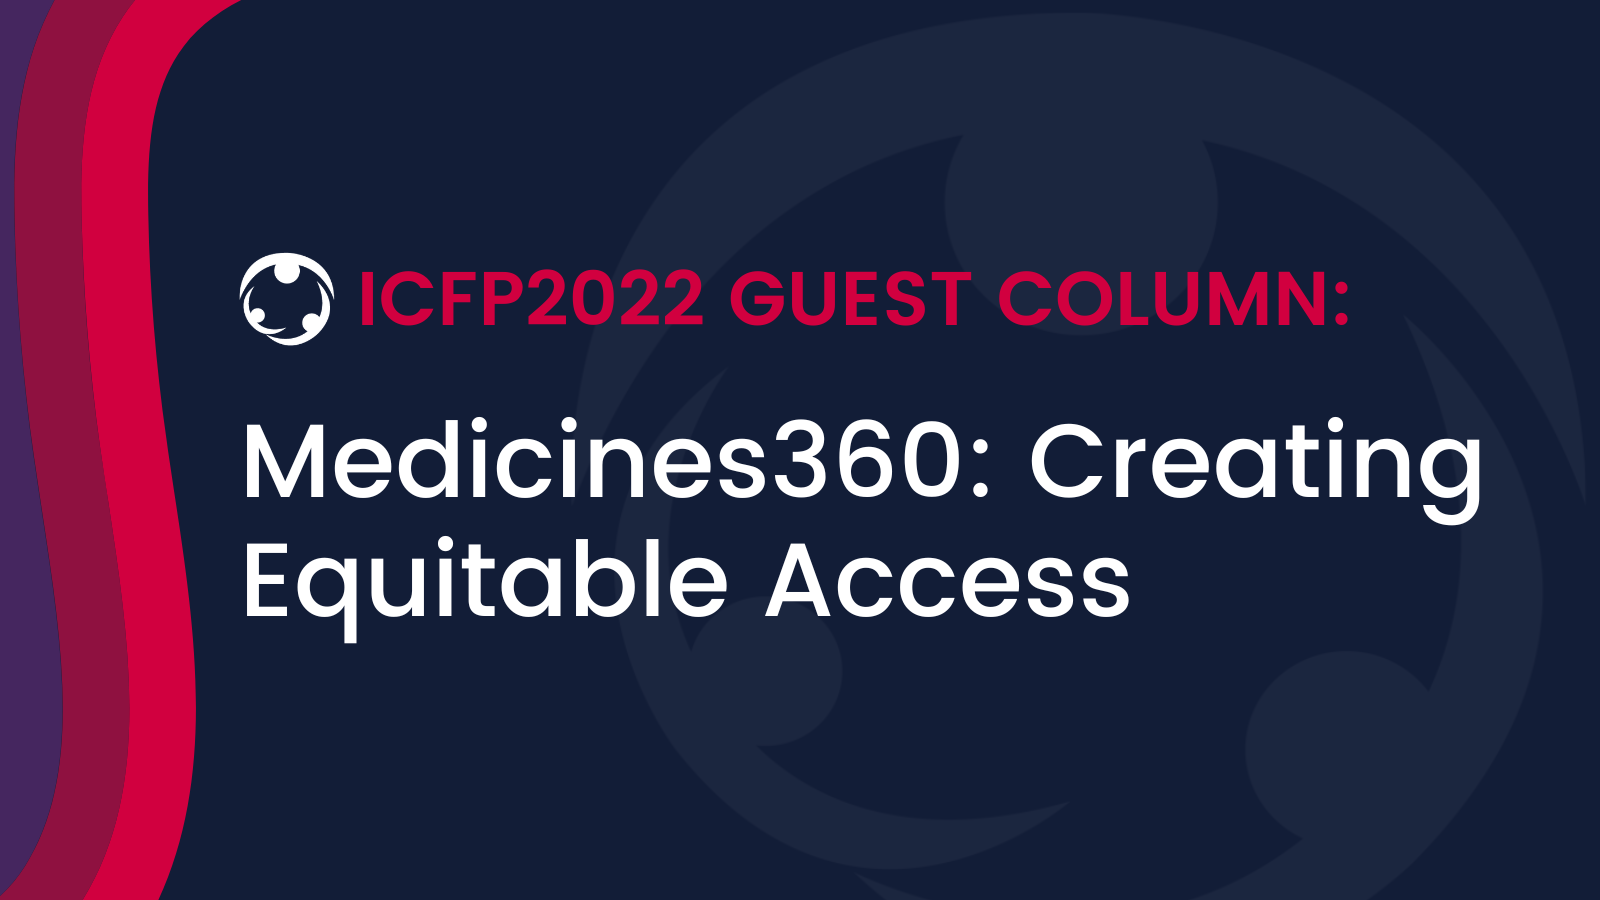 Medicines360: Creating Equitable Access